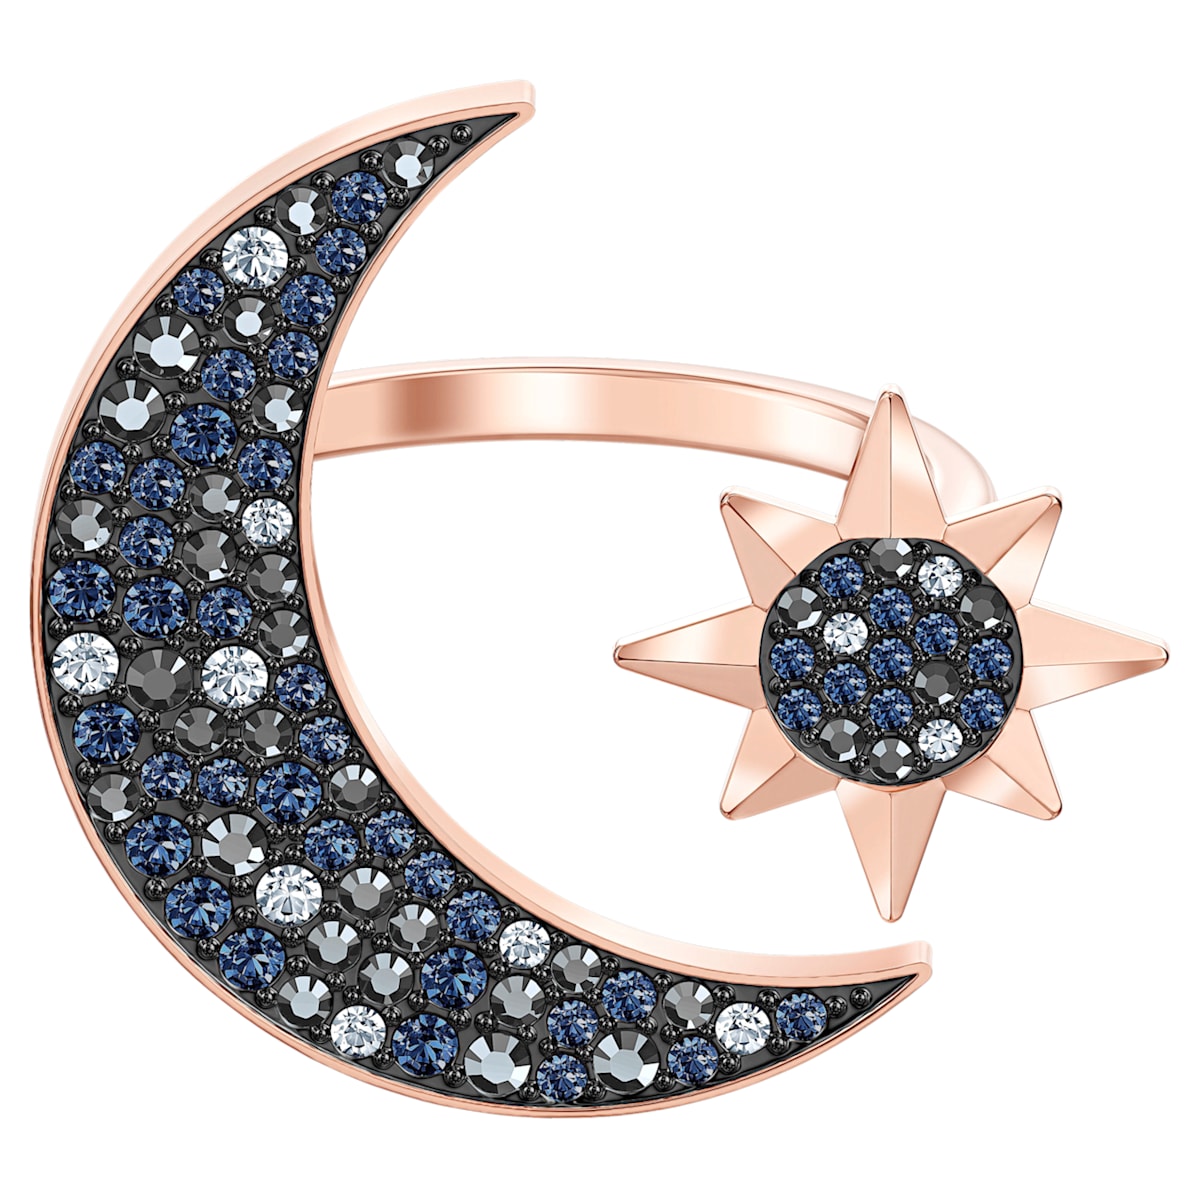 Swarovski Symbolic open ring, Graduated crystals, Moon and star, Multicolored, Rose-gold tone plated - Swarovski, 5499613